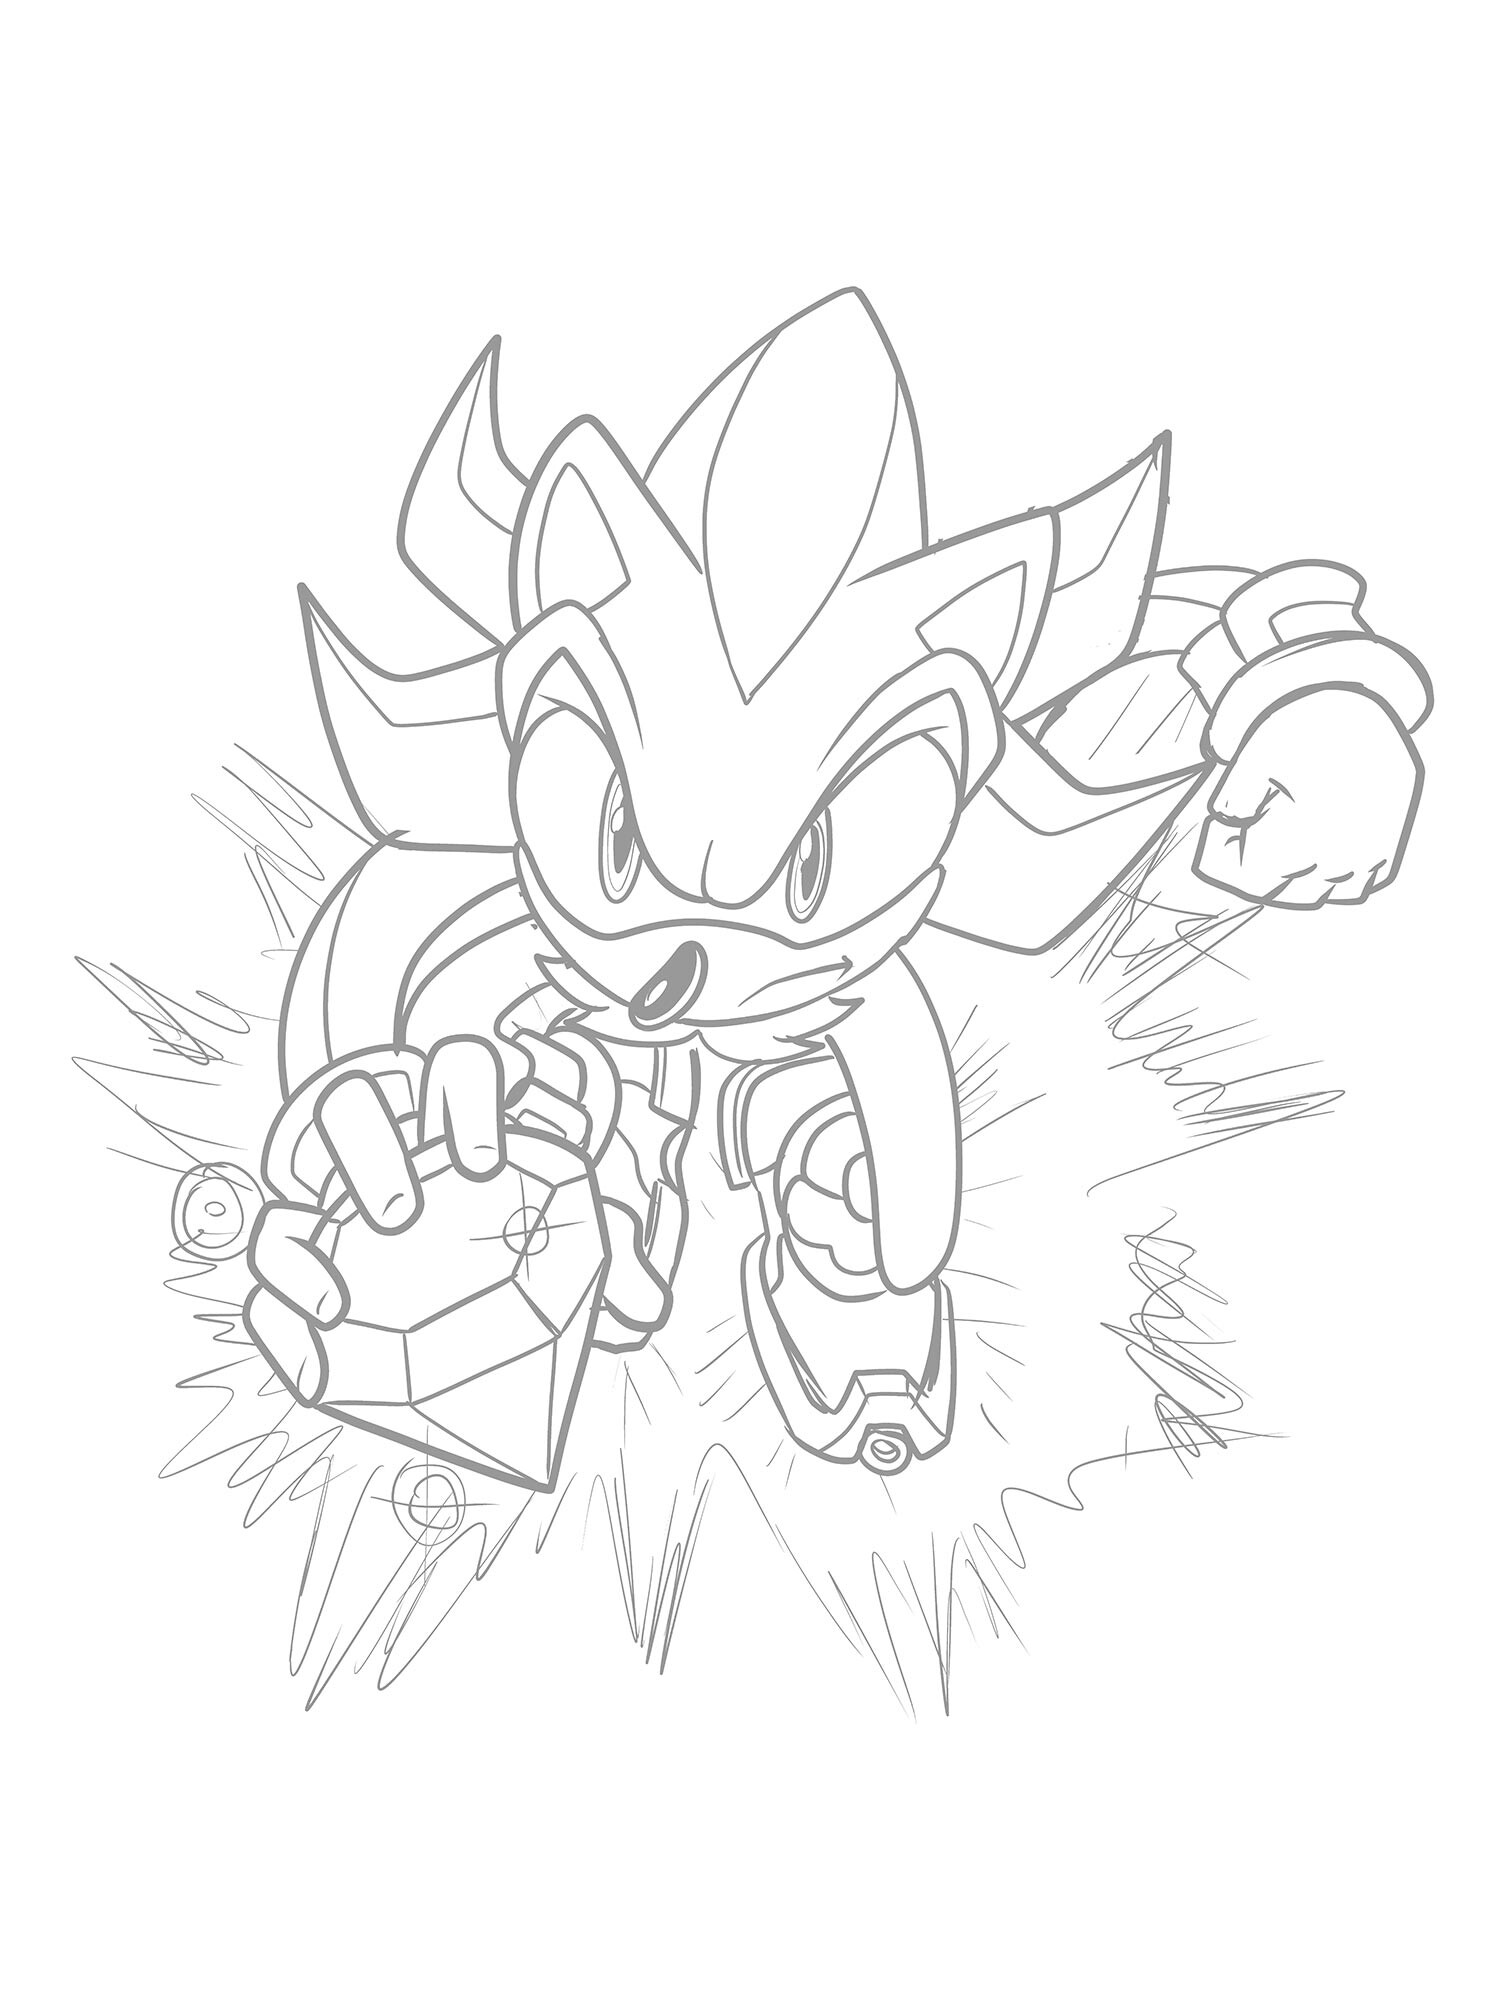 Sonic Drawing - How To Draw Sonic Step By Step